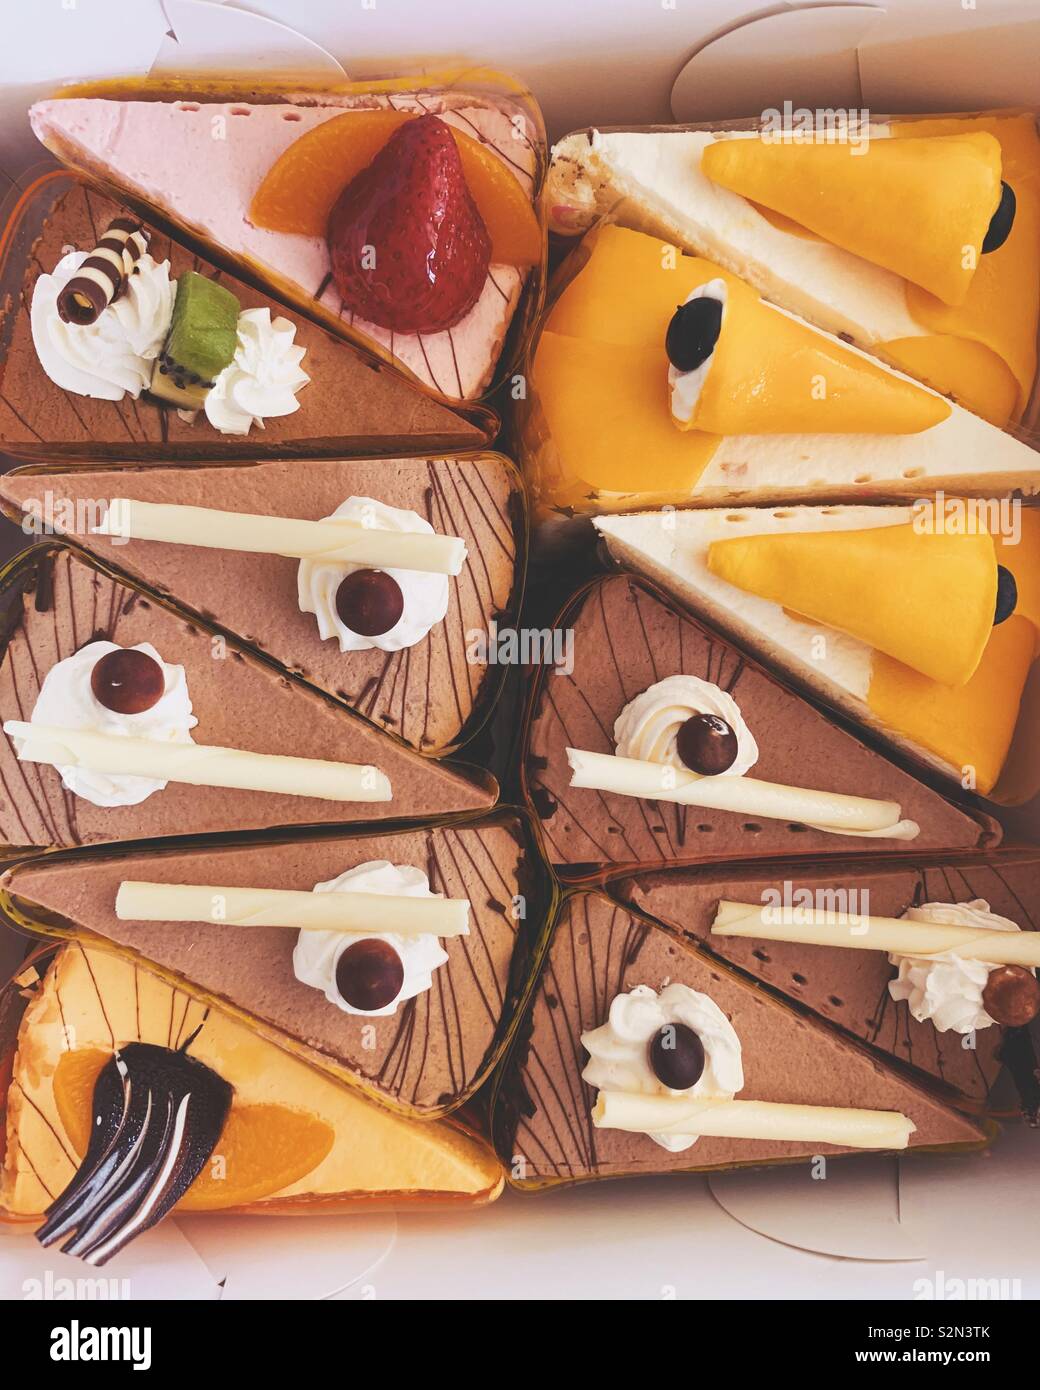 26,336 Small Slice Cake Images, Stock Photos, 3D objects, & Vectors |  Shutterstock